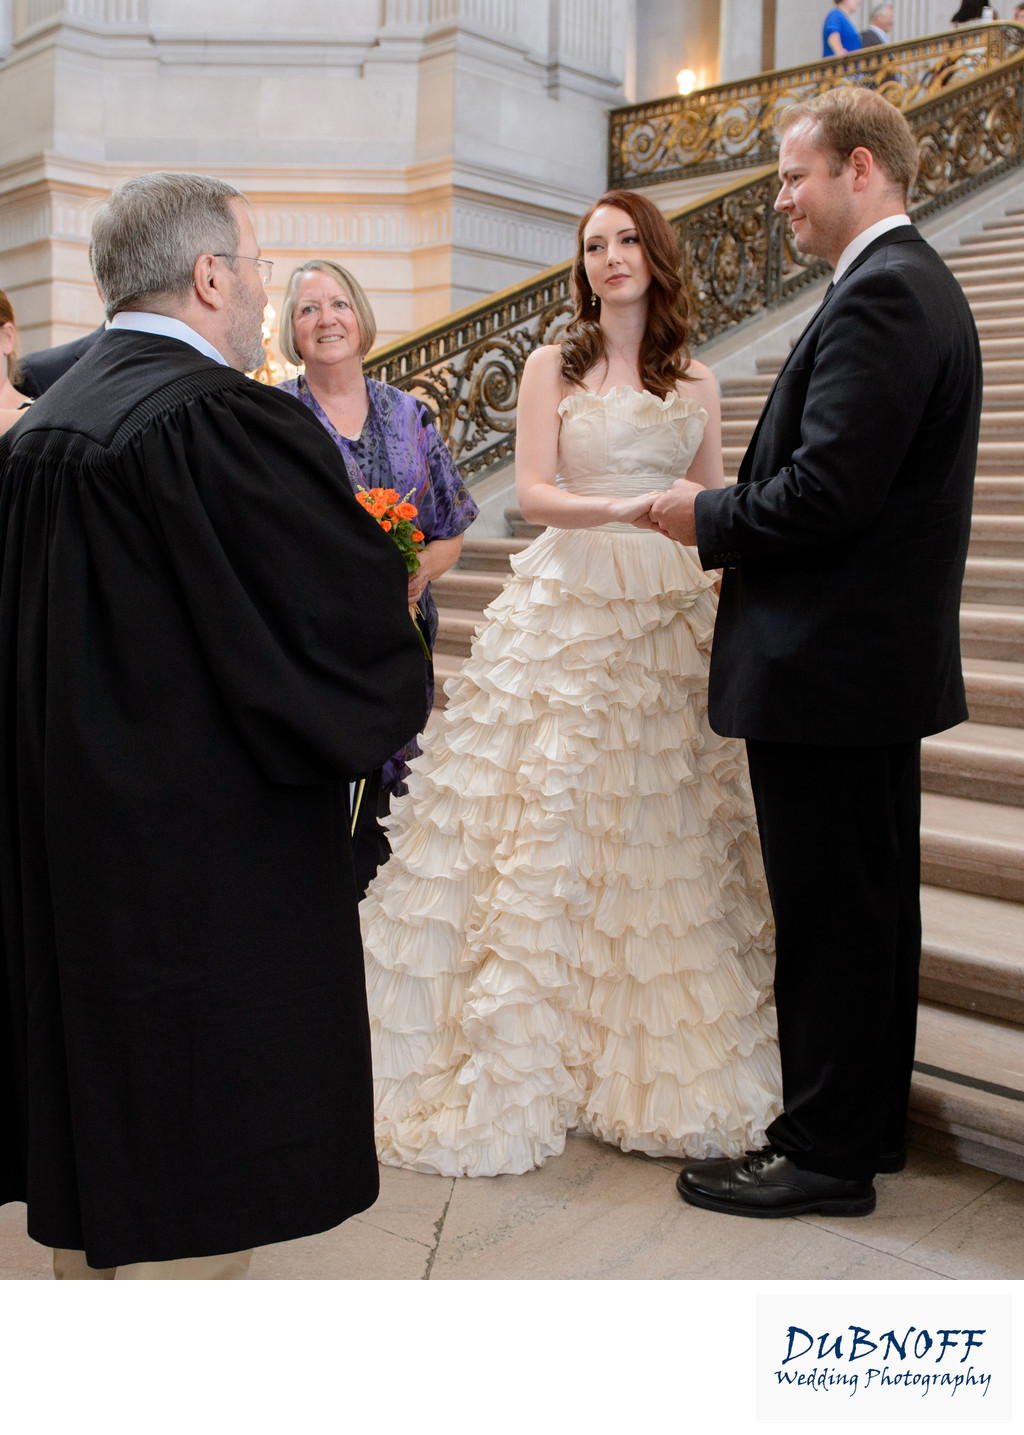 Civil Ceremony on Grand Staircase at San Francisco City Hall